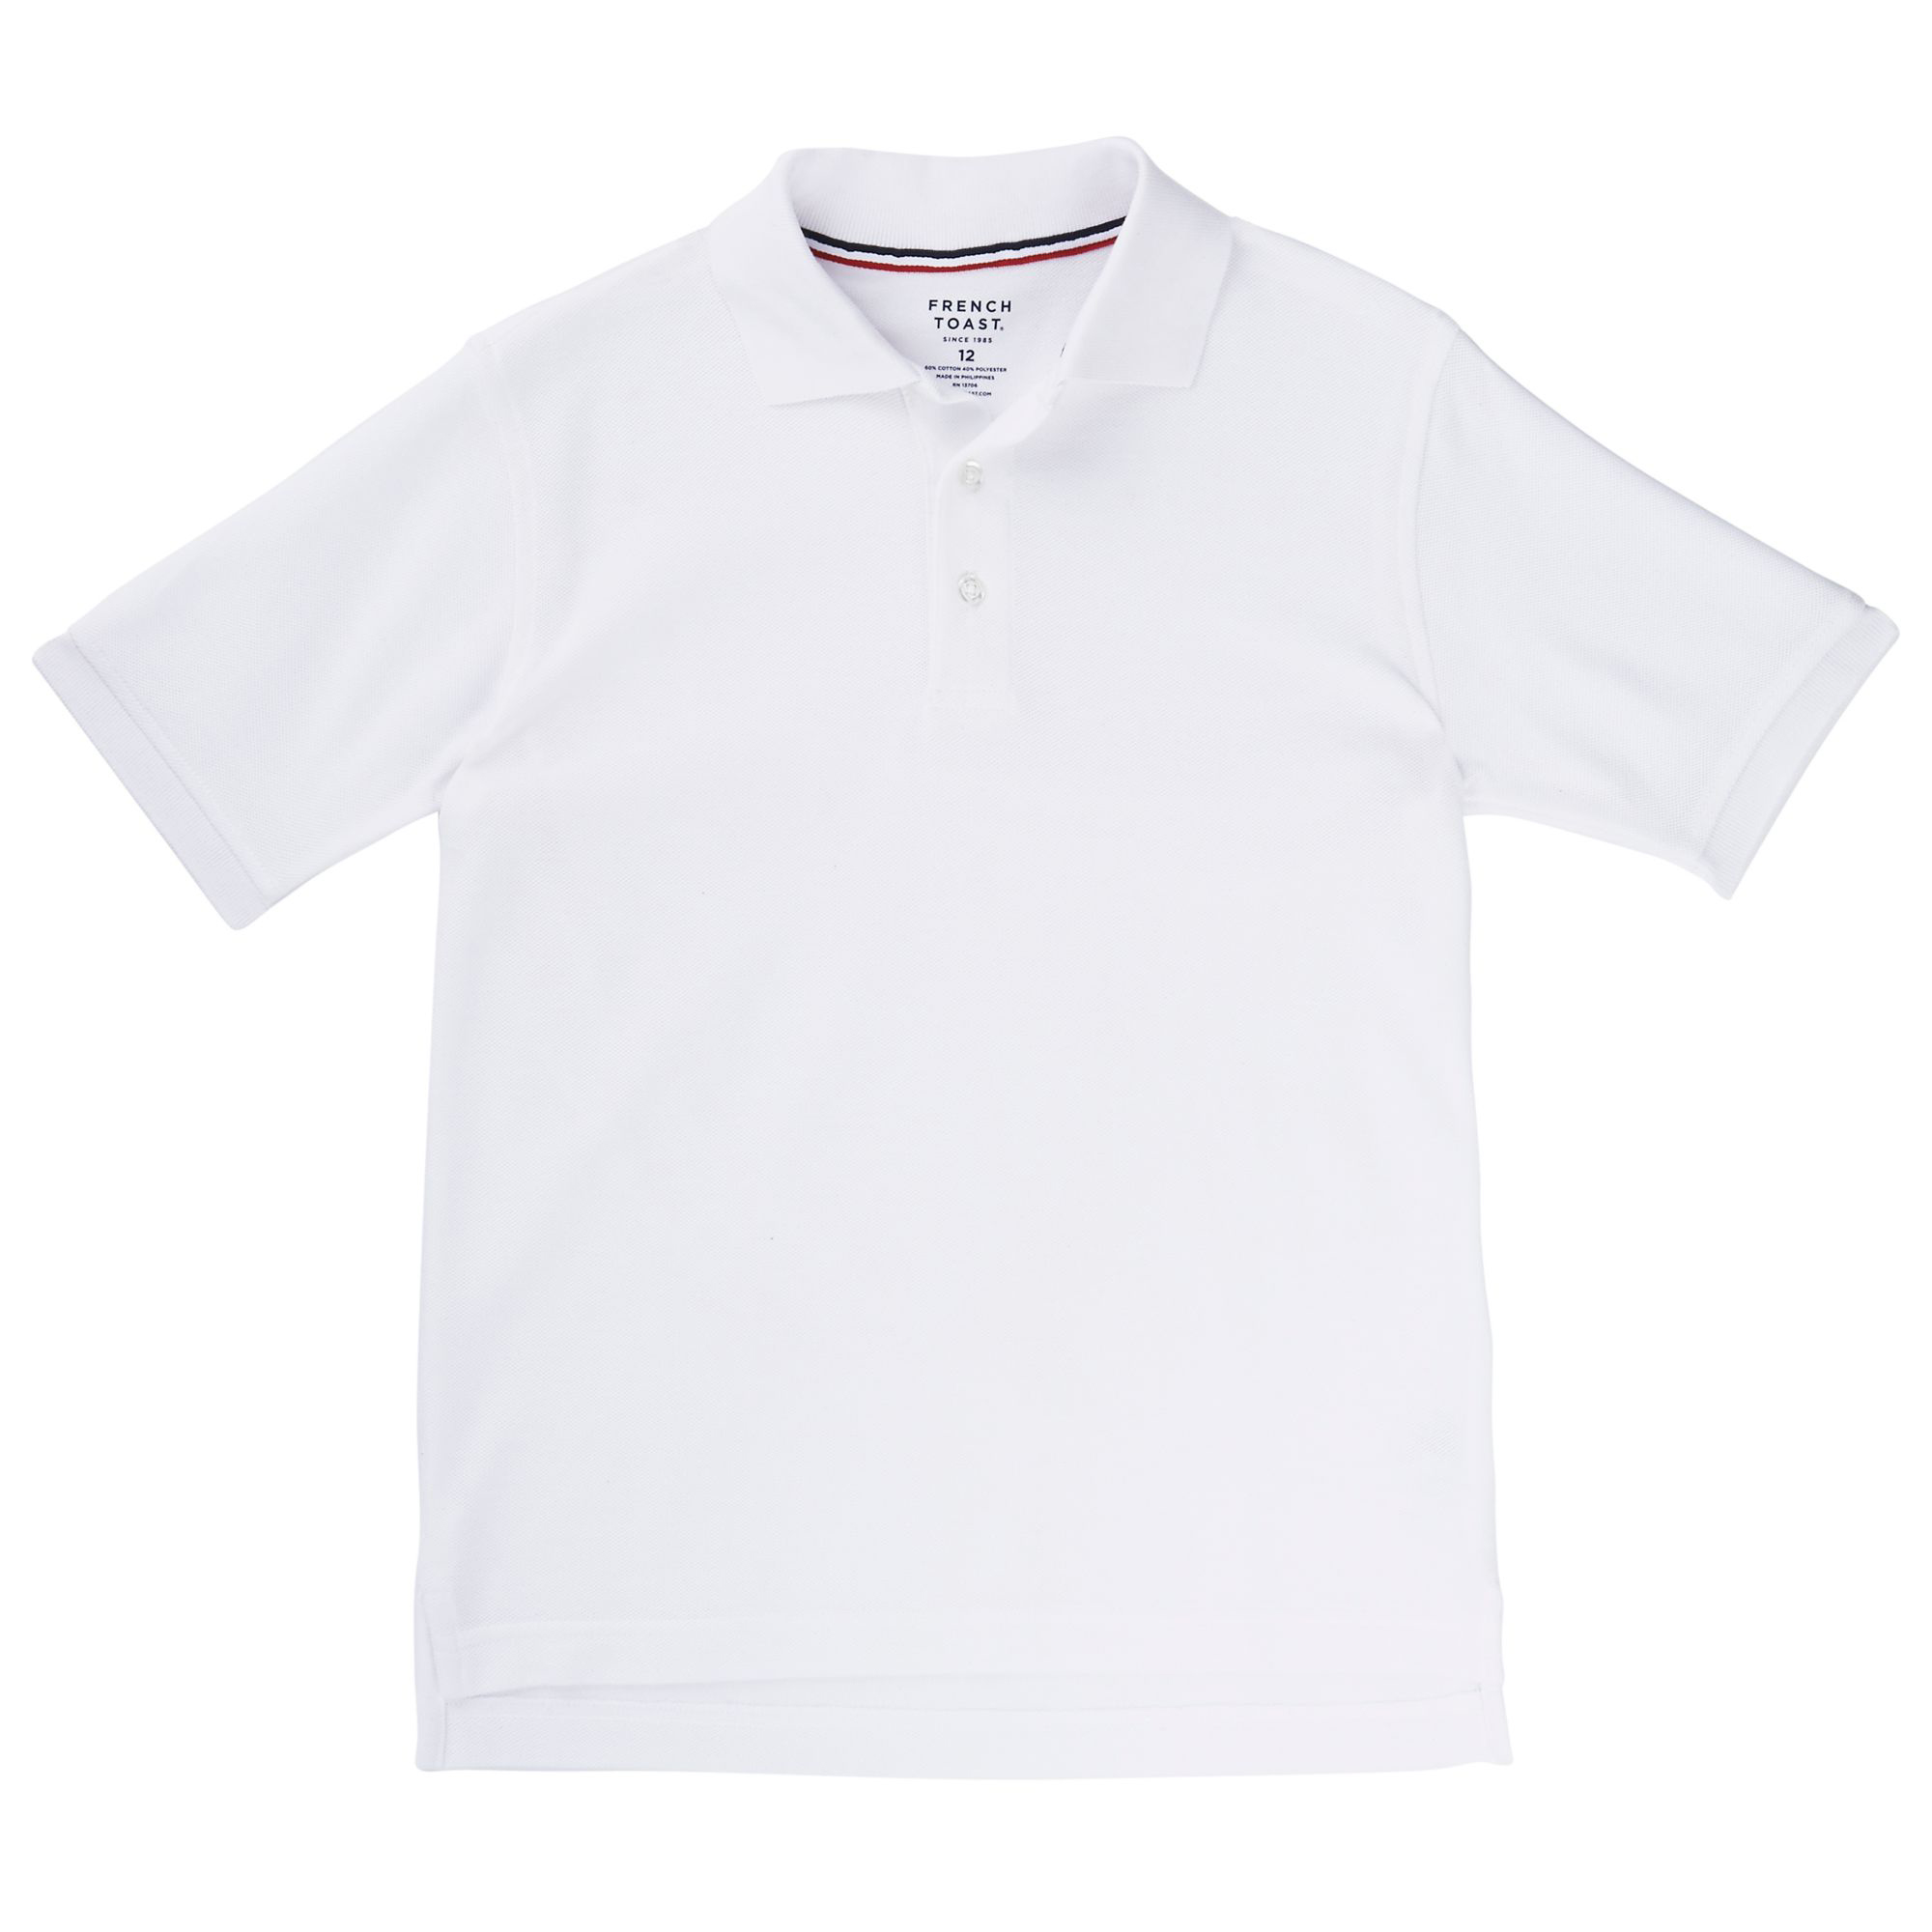 Zeco sold by Essential Wear 2 School Boys Quality White Short Sleeve Polo Shirt Age 2 3 4 5 6 7 8 9 10 11